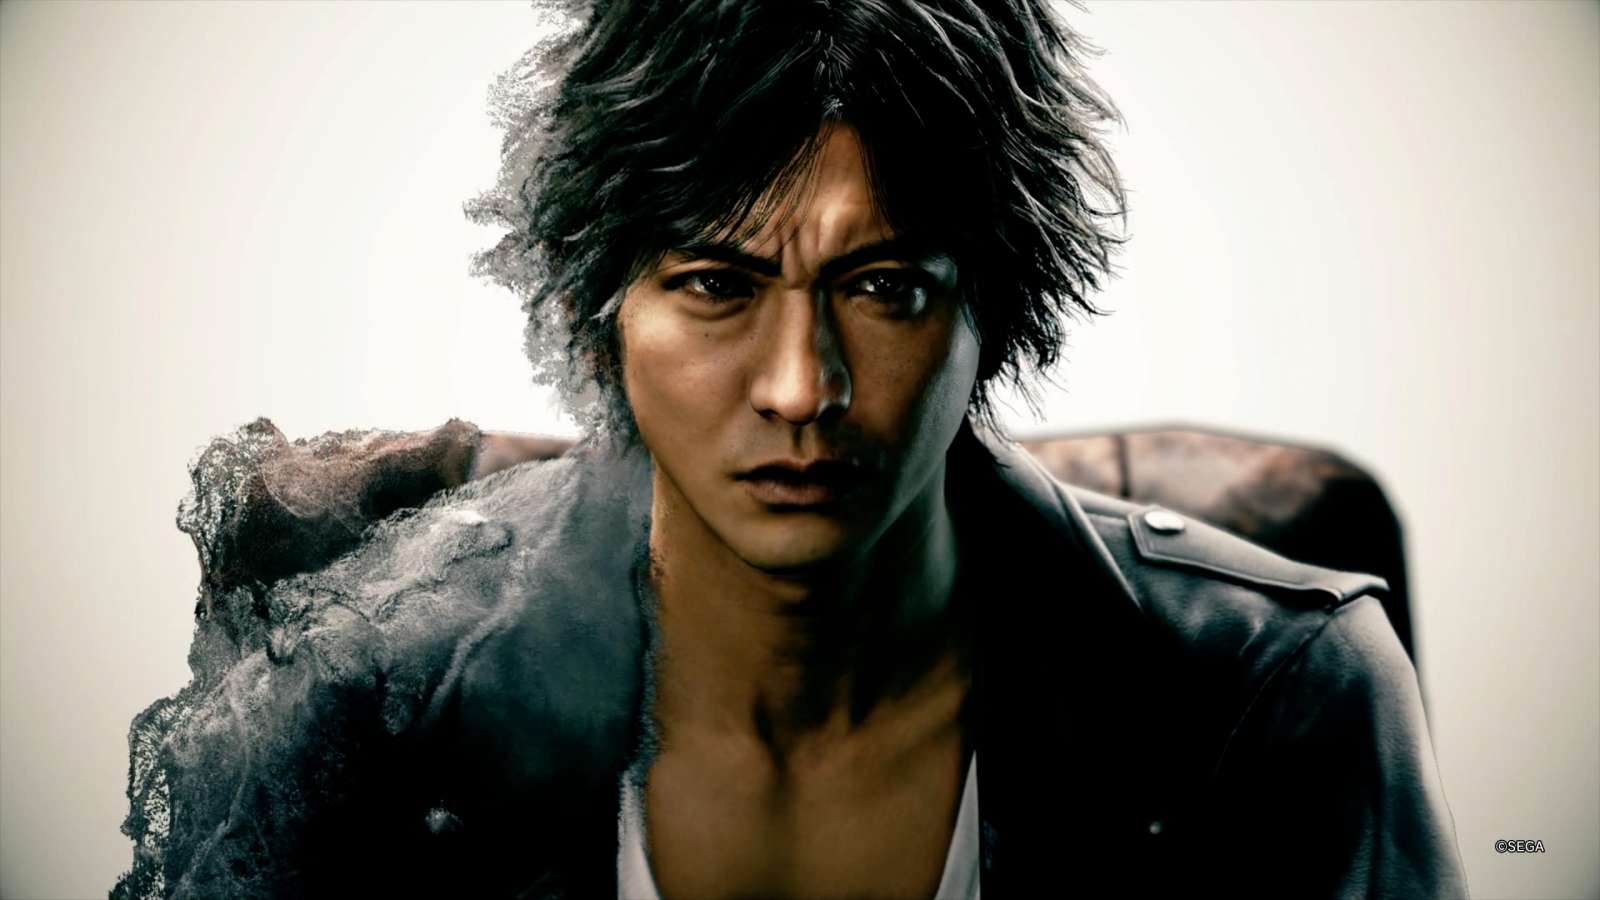 Judgment Review (PS5) – Murder In The Streets of Kamurocho